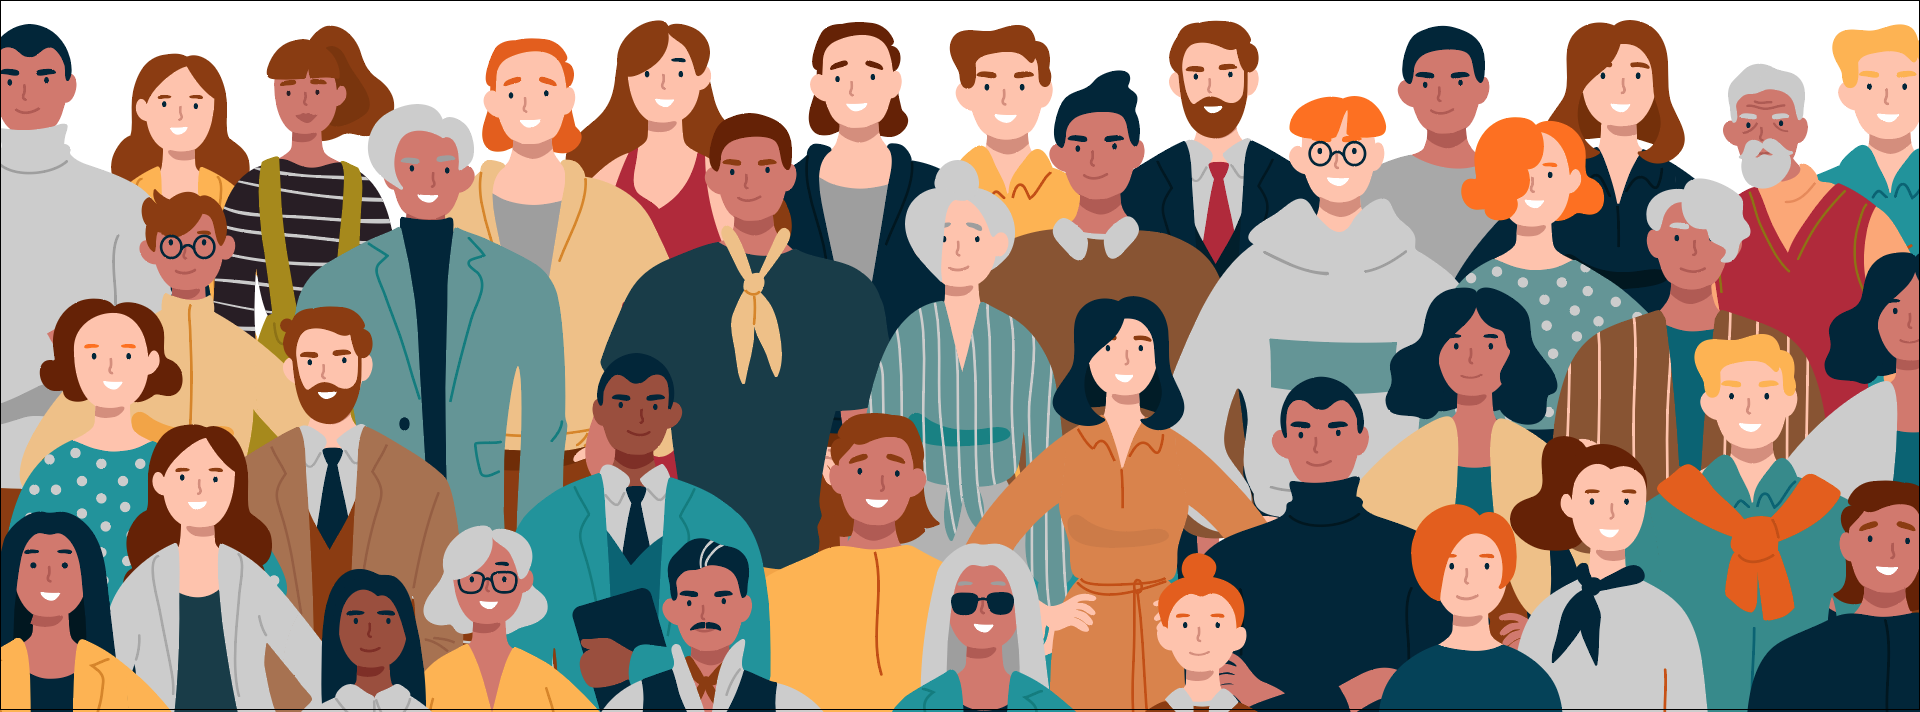 Portrait of business team standing together. Multiracial business people. Portrait of business team standing together. Multiracial business people. People stock vector